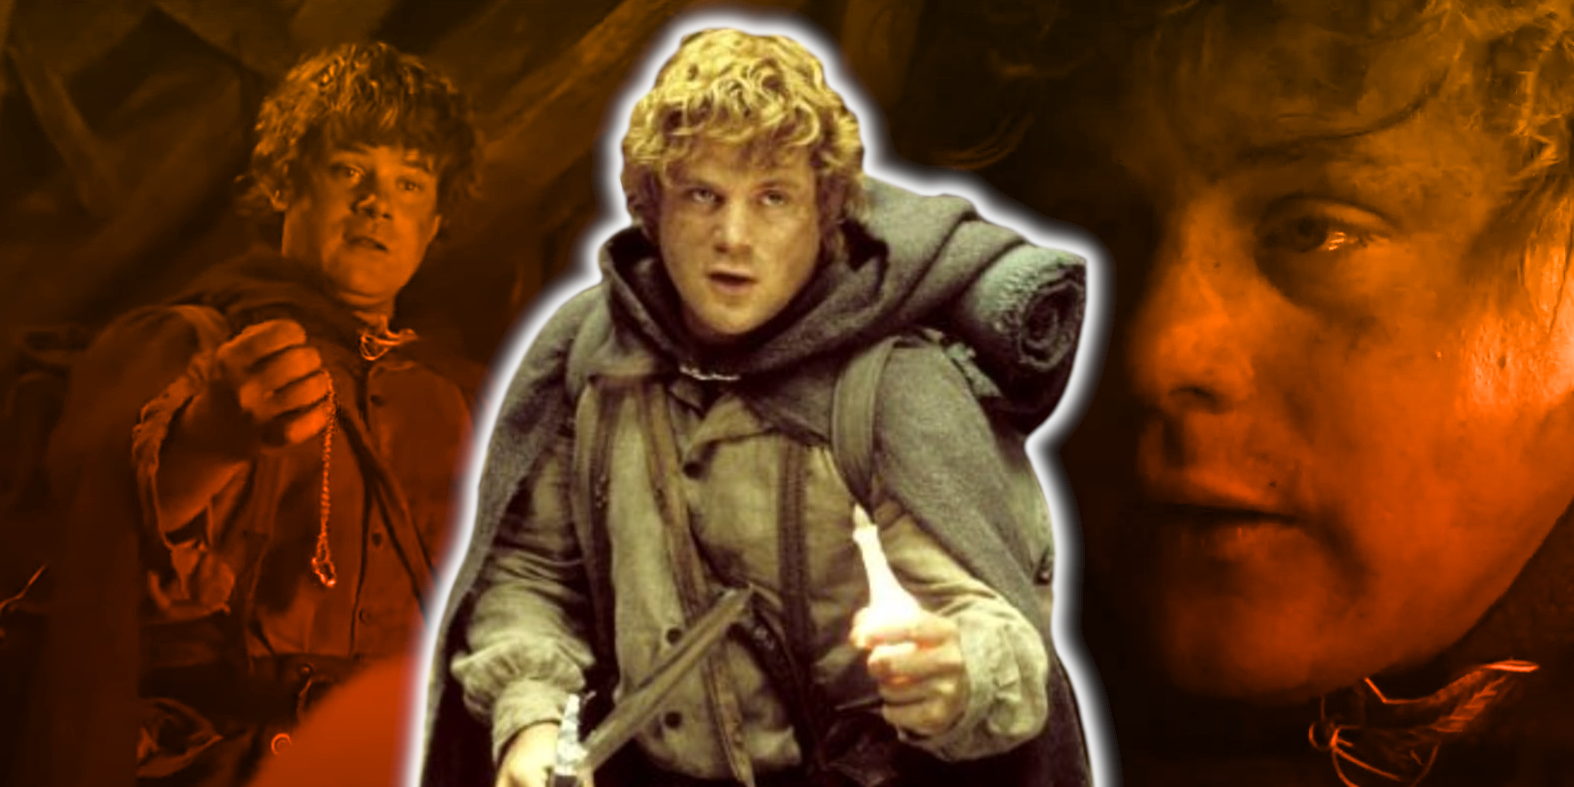 Sean Astin as Samwise Gamgee in front of closeups of himself from The Lord of the Rings